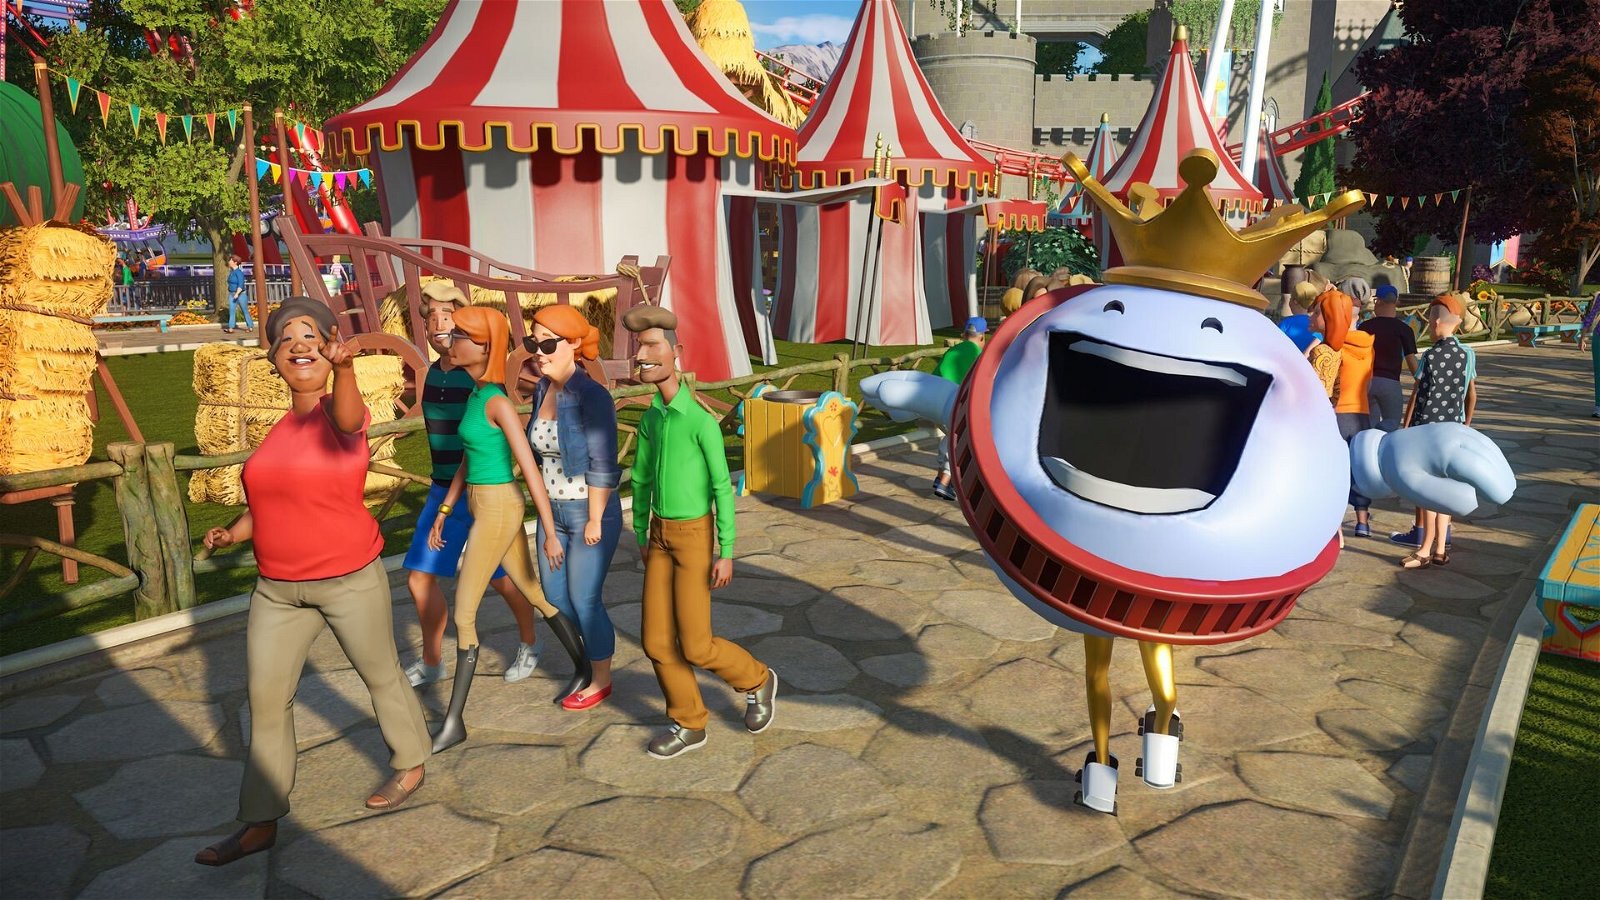 Planet Coaster, Planet Coaster Console Edition, Planet Coaster [Console Edition], XONE, Xbox One, PS4, Xbox Series X, PS5, PlayStation 5, PlayStation 4, EU, Europe, Gameplay, Features, price, pre-order now, trailer, screenshots, Frontier Developments